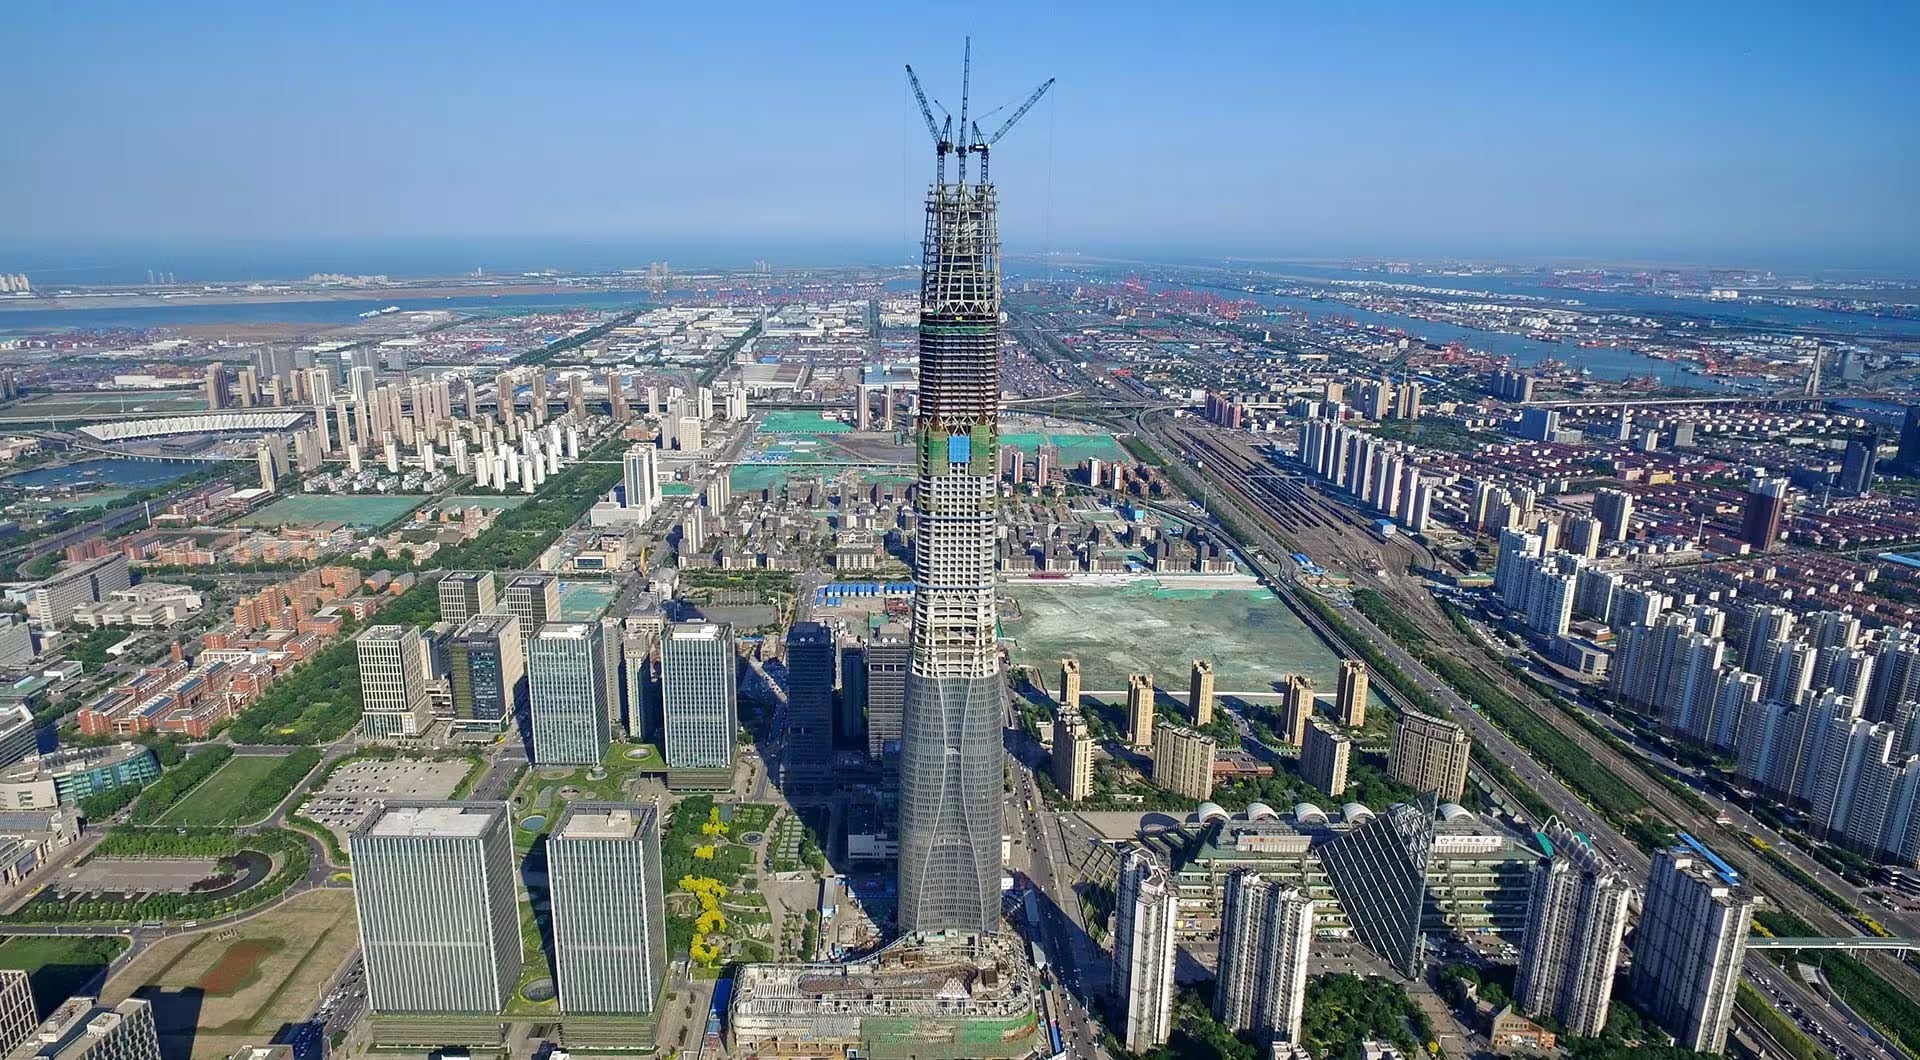 China's supertall Tianjin Chow Tai Fook is shown under construction.